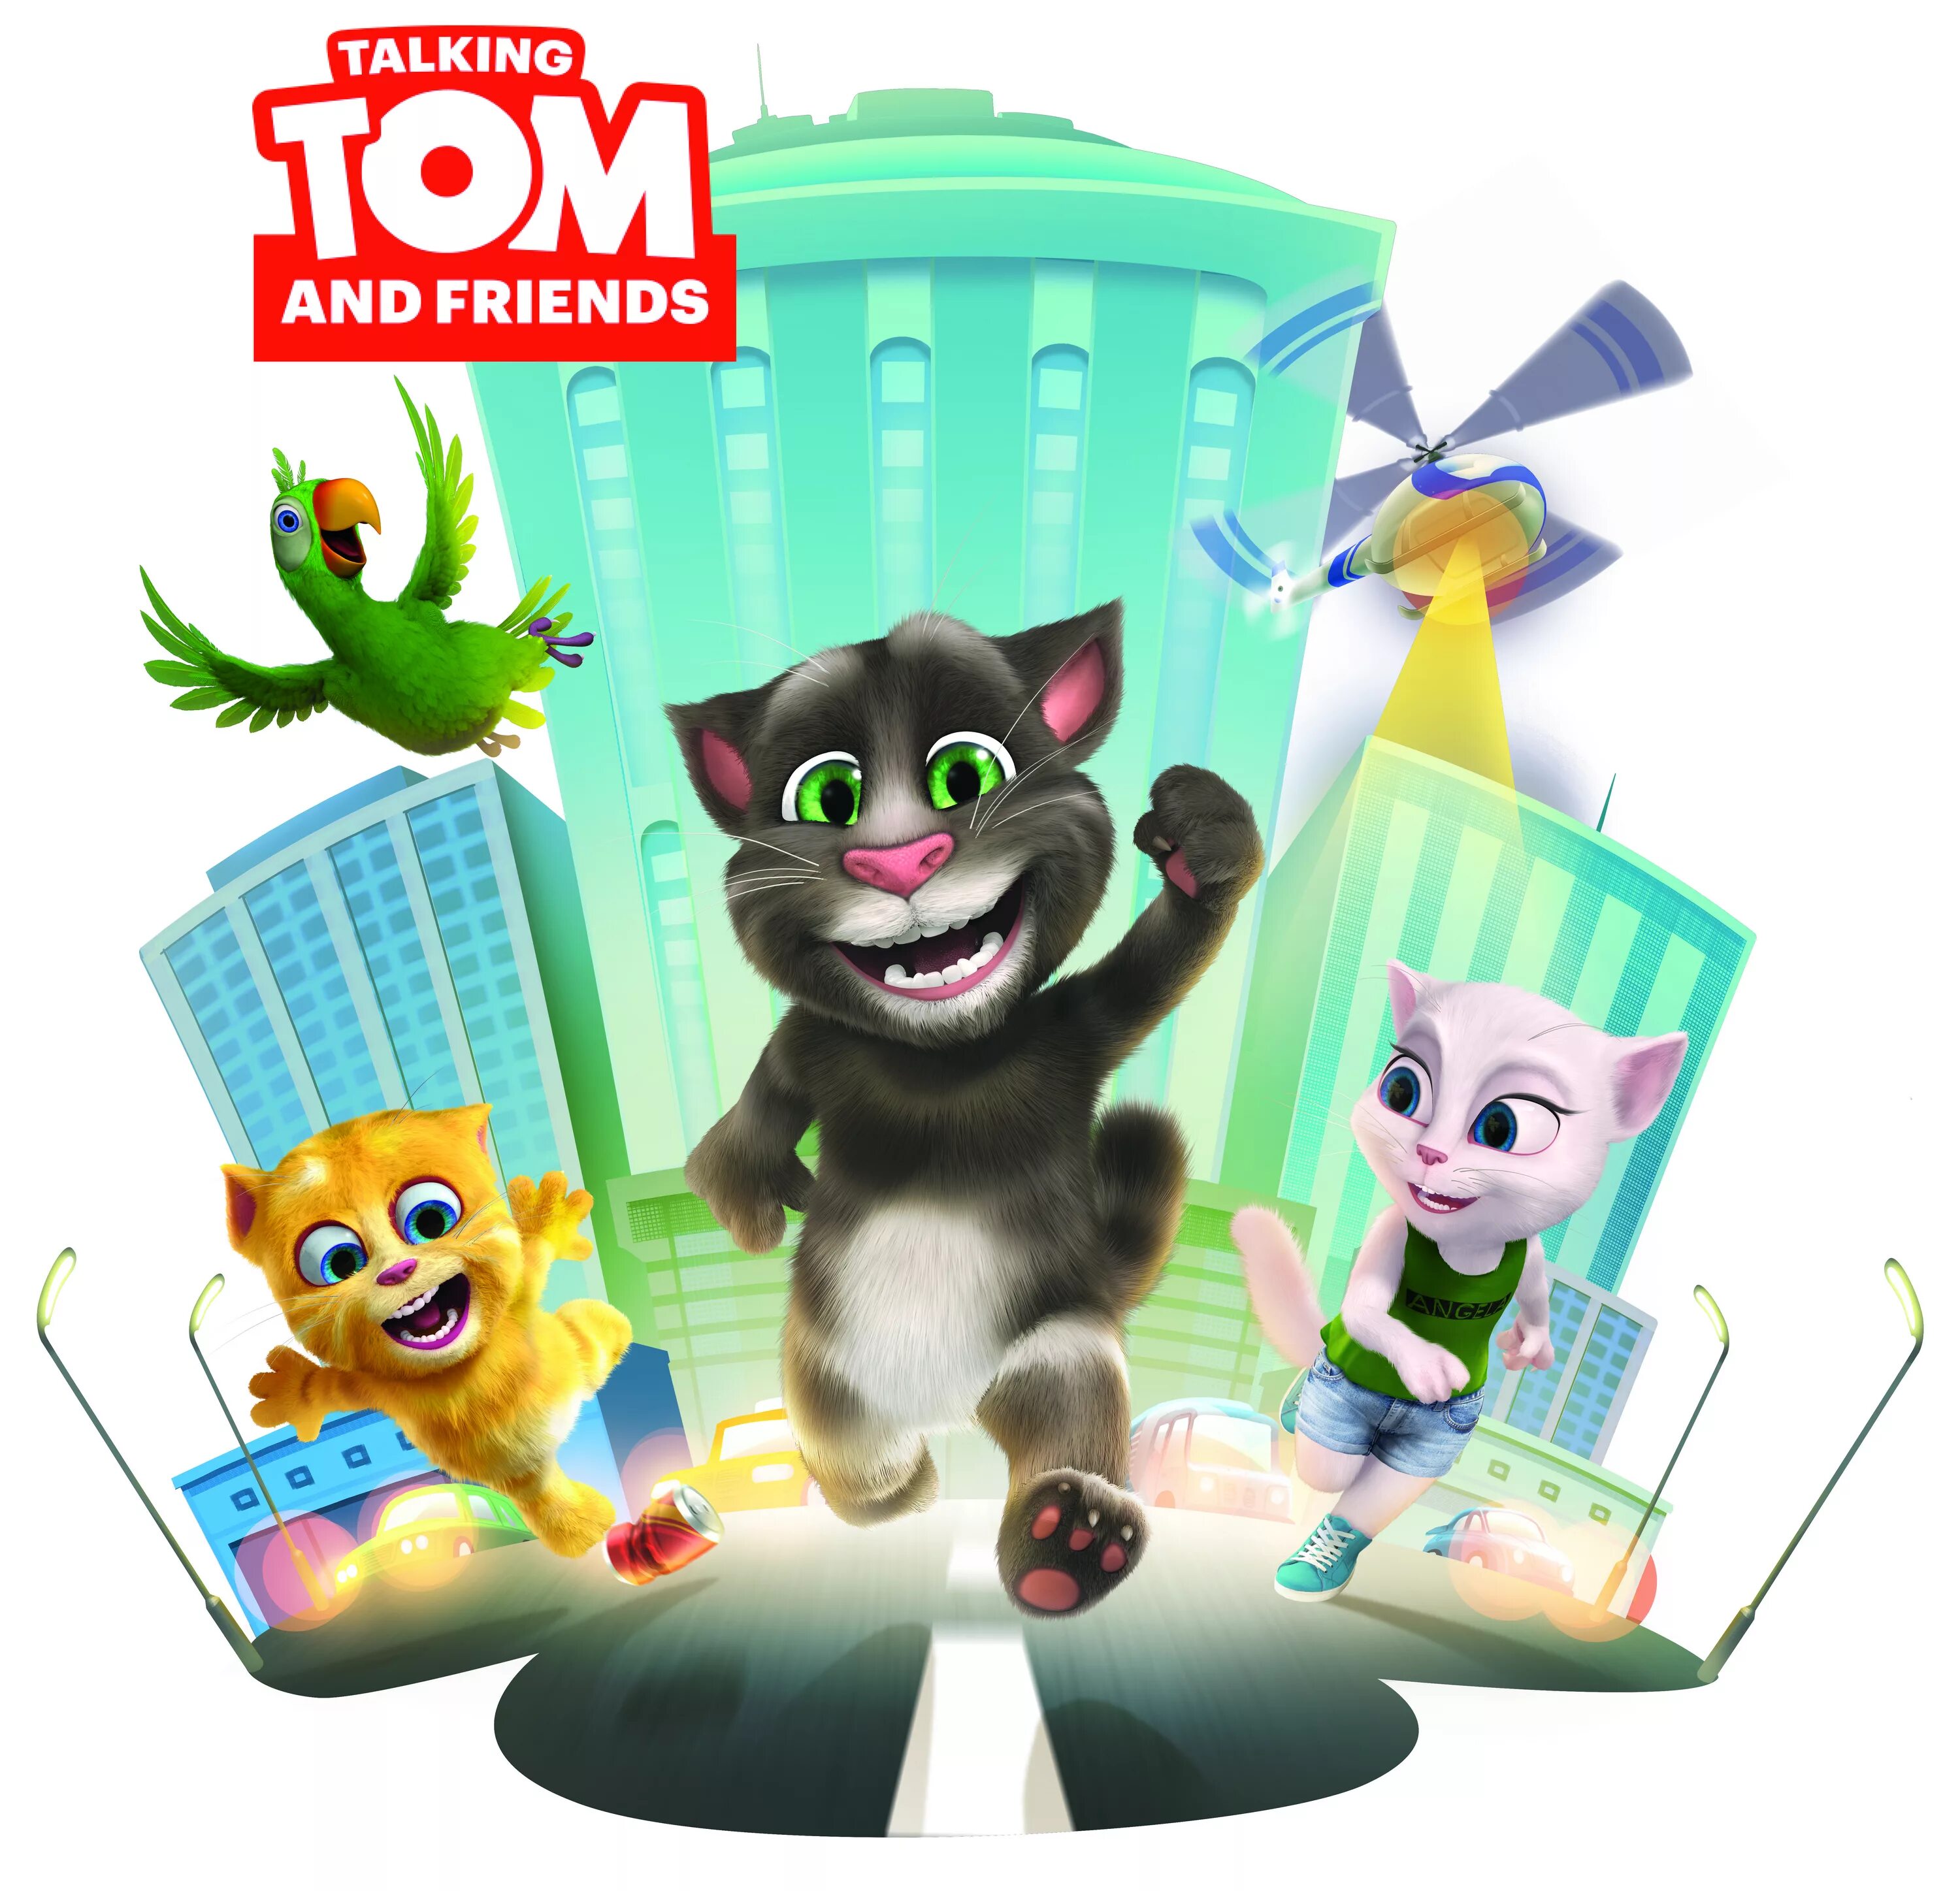 Talking outfit7. Outfit7 talking Бен. Джинджер outfit7. Outfit7 talking Tom and friends. My talking Tom 2015.